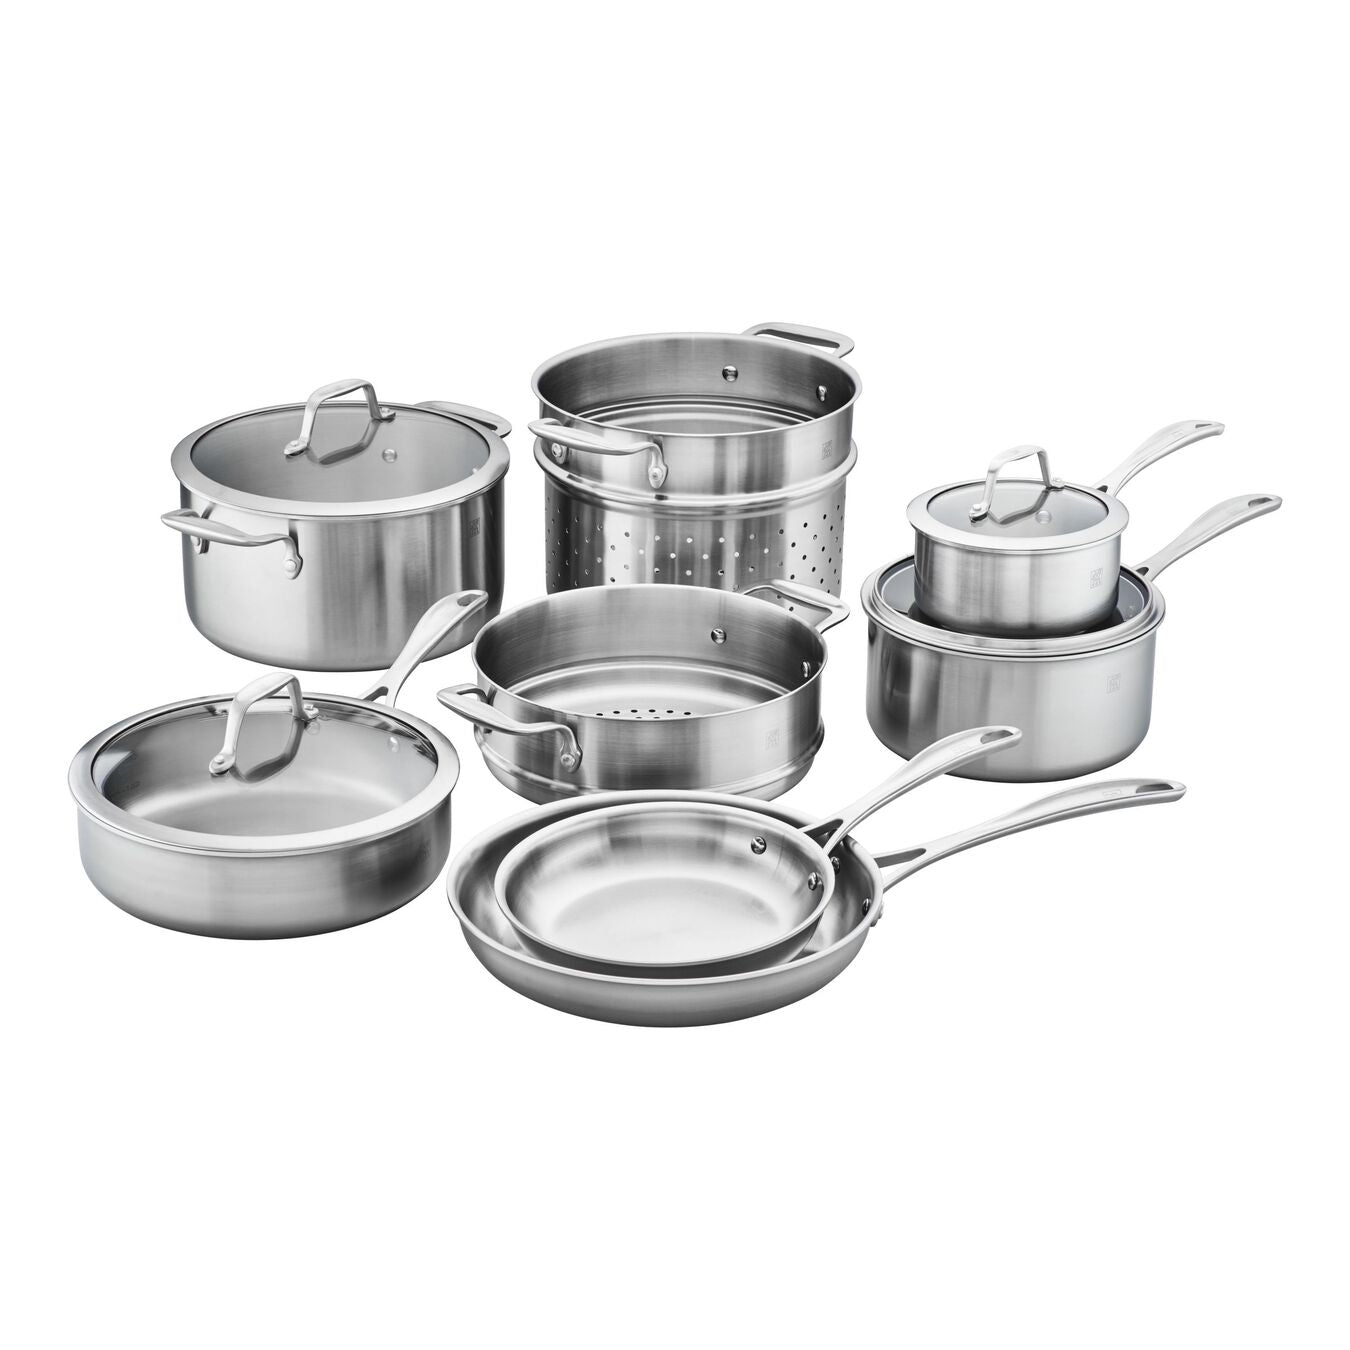 ZWILLING 12pc Stainless Steel Cookware Set, Spirit 3-Ply Series